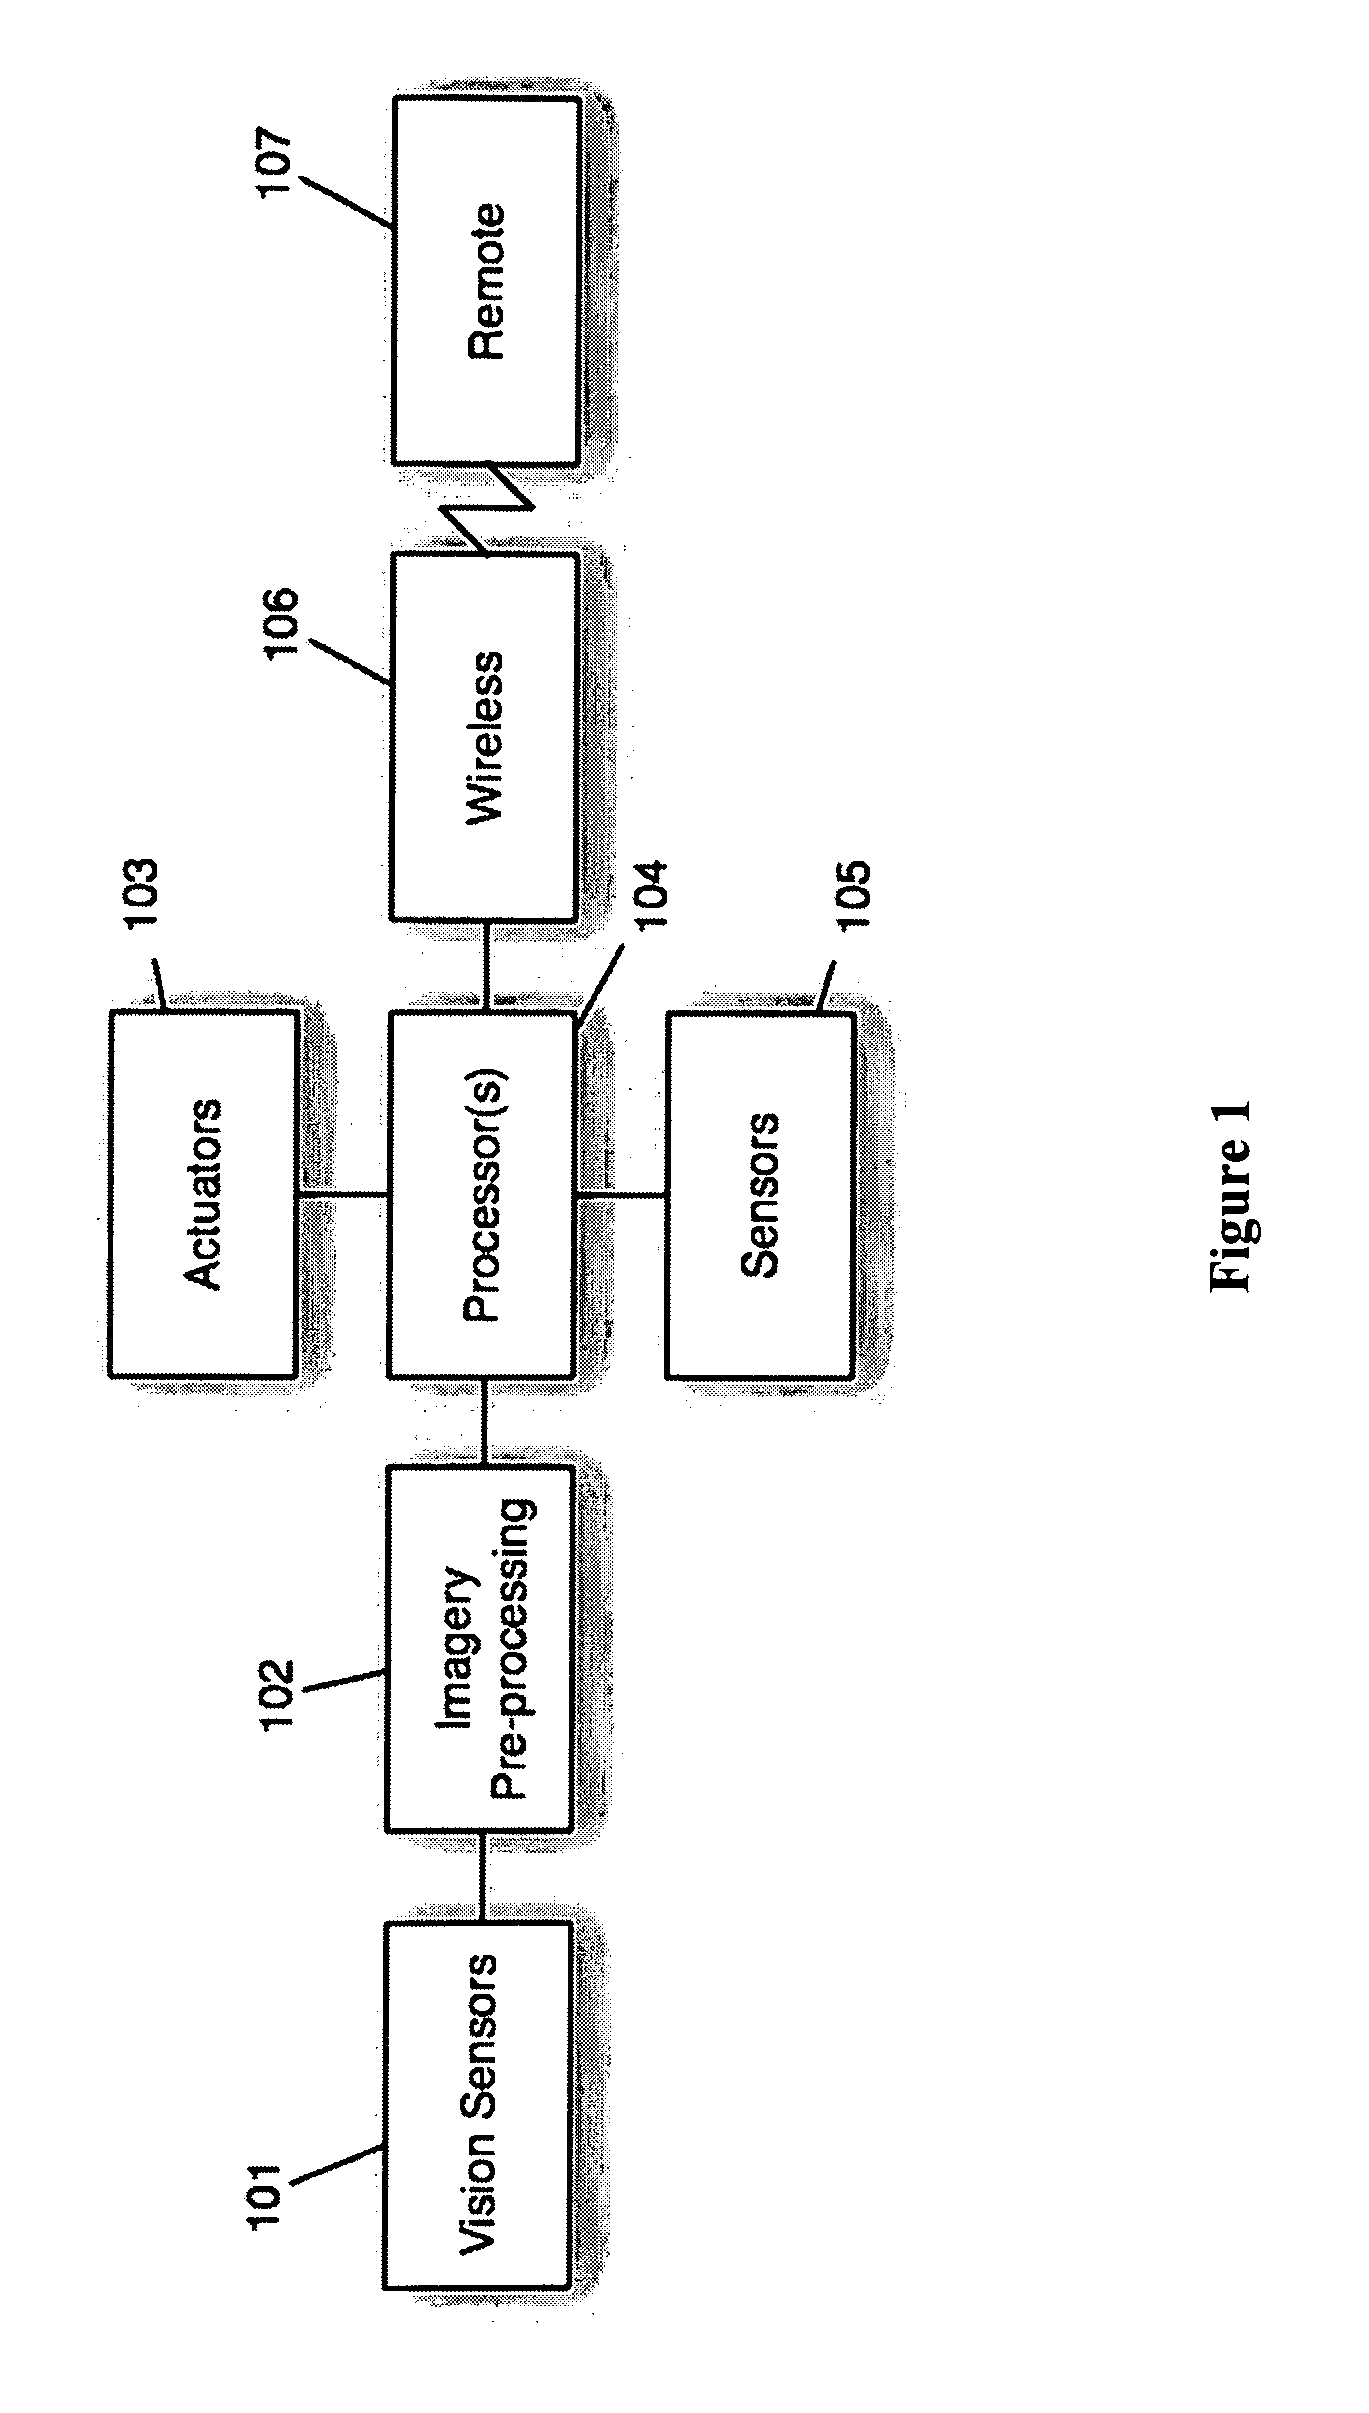 System and method for onboard vision processing